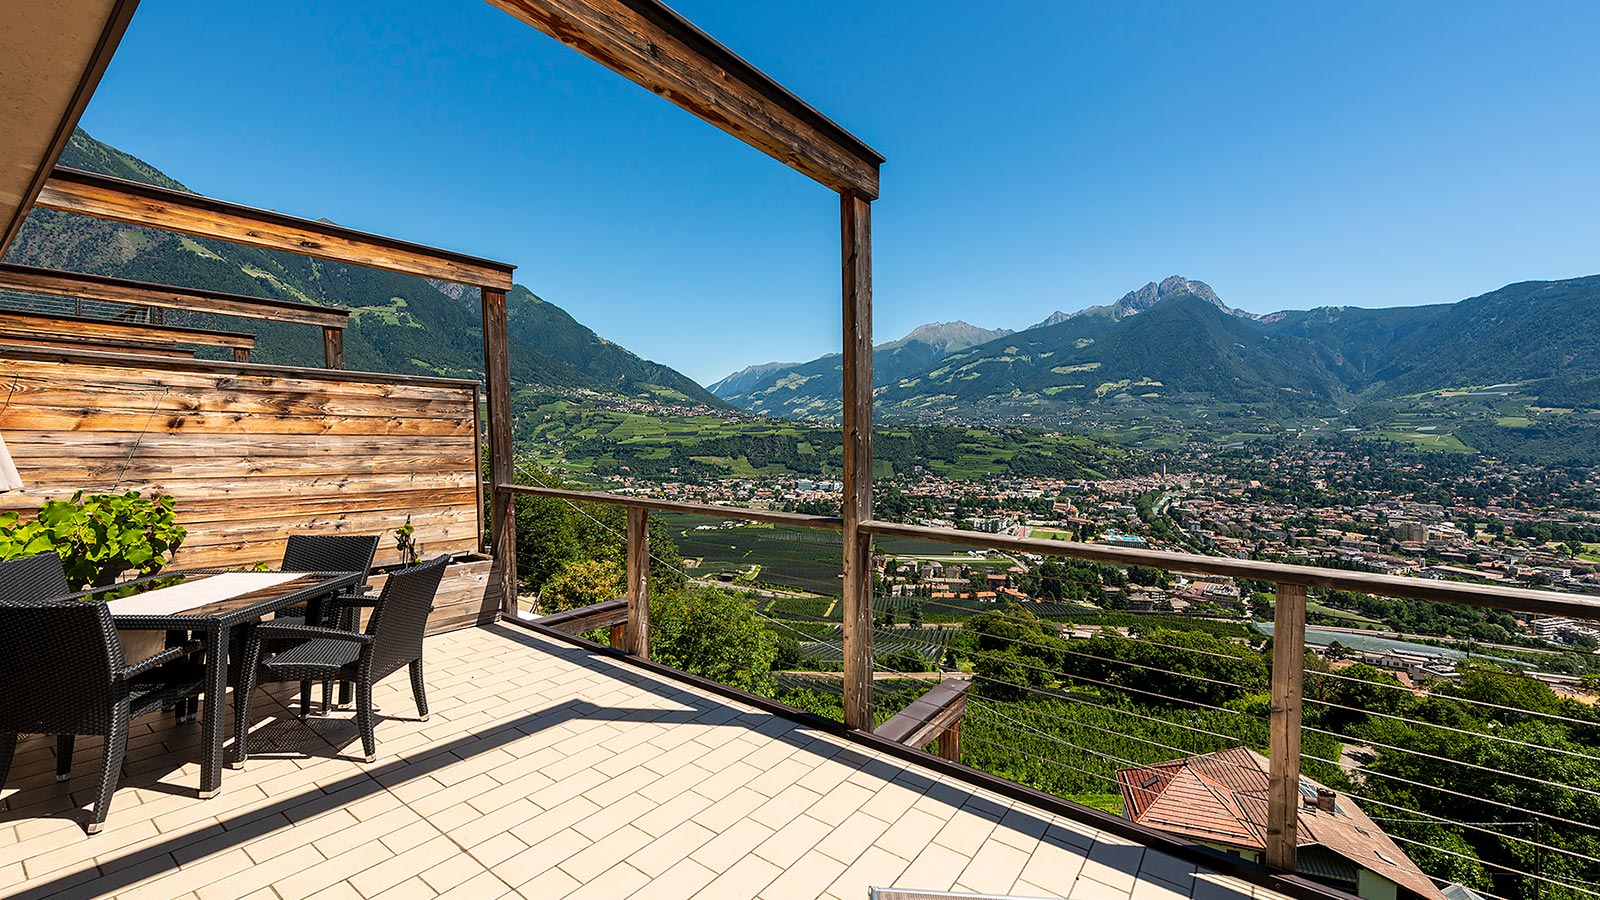 The terrace of Aqualis , your accommodation near Merano